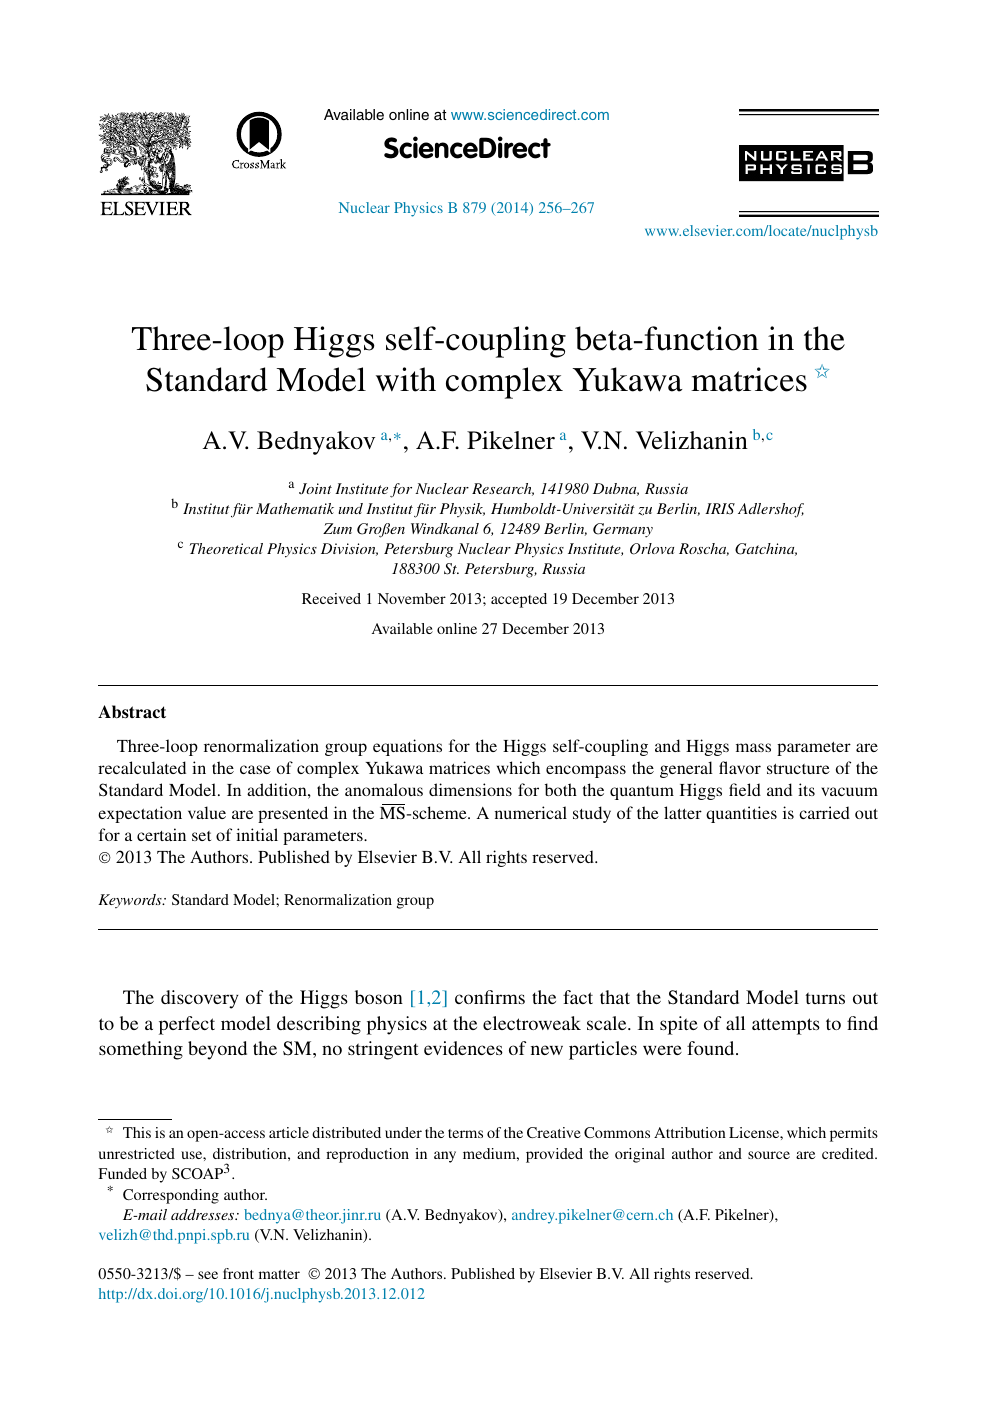 Three Loop Higgs Self Coupling Beta Function In The Standard Model With Complex Yukawa Matrices Topic Of Research Paper In Physical Sciences Download Scholarly Article Pdf And Read For Free On Cyberleninka Open Science